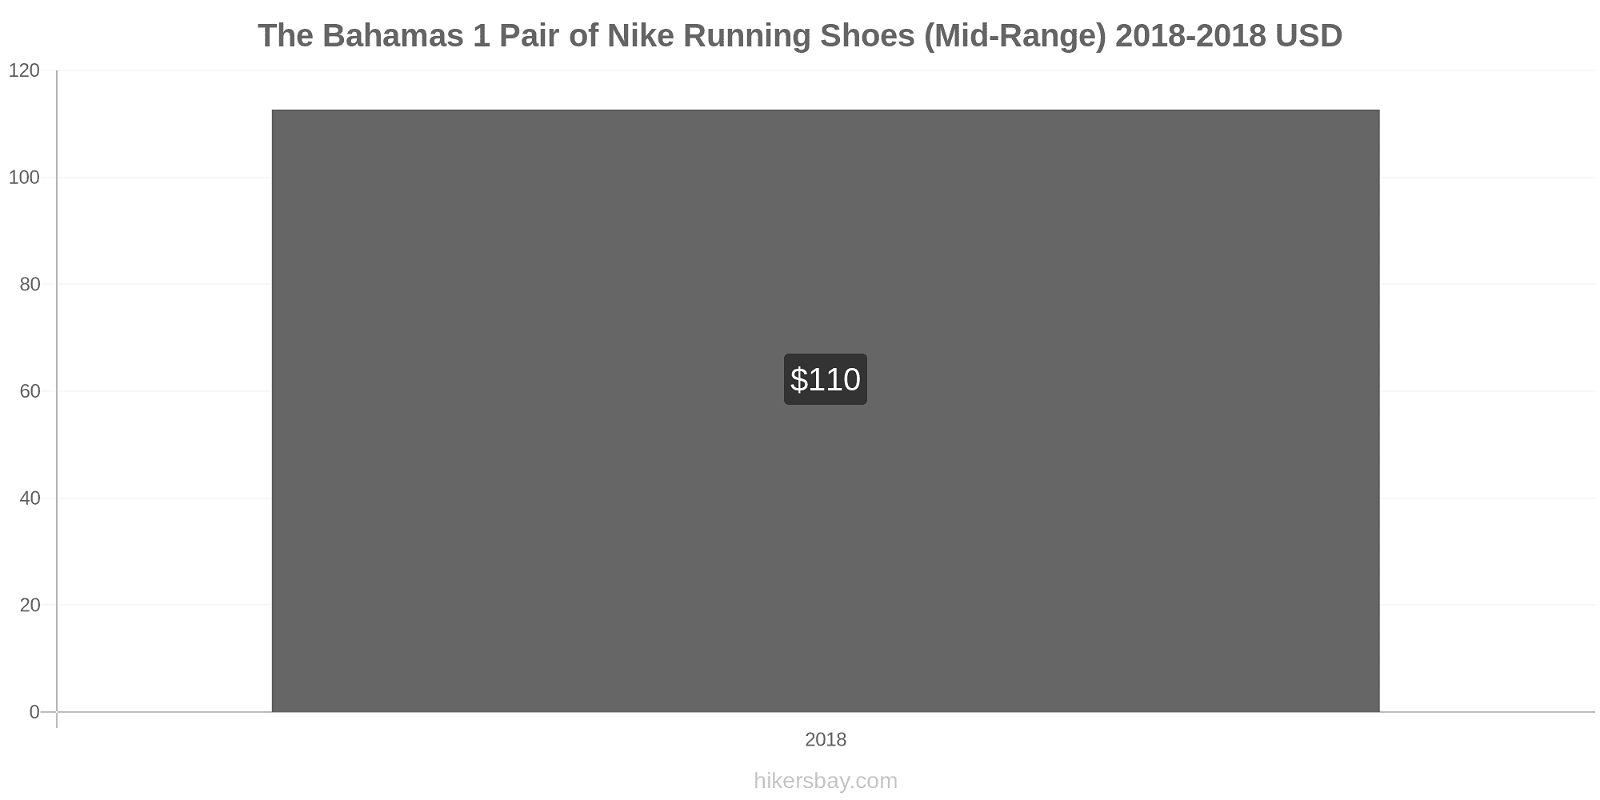 The Bahamas price changes 1 Pair of Nike Running Shoes (Mid-Range) hikersbay.com